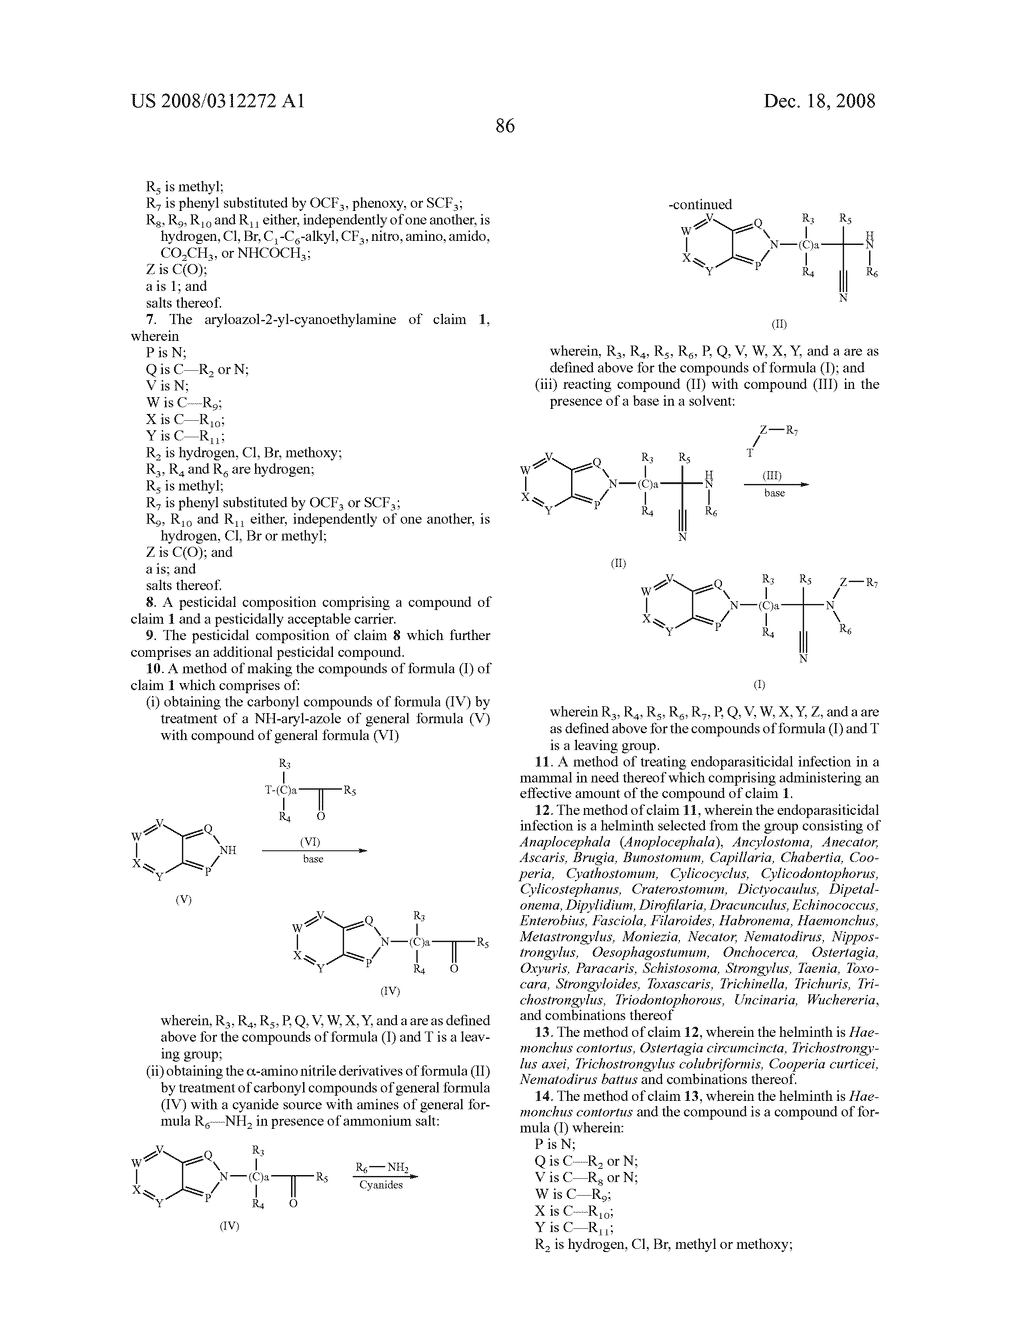 ARYLOAZOL-2-YL CYANOETHYLAMINO COMPOUNDS, METHOD OF MAKING AND METHOD OF USING THEREOF - diagram, schematic, and image 87